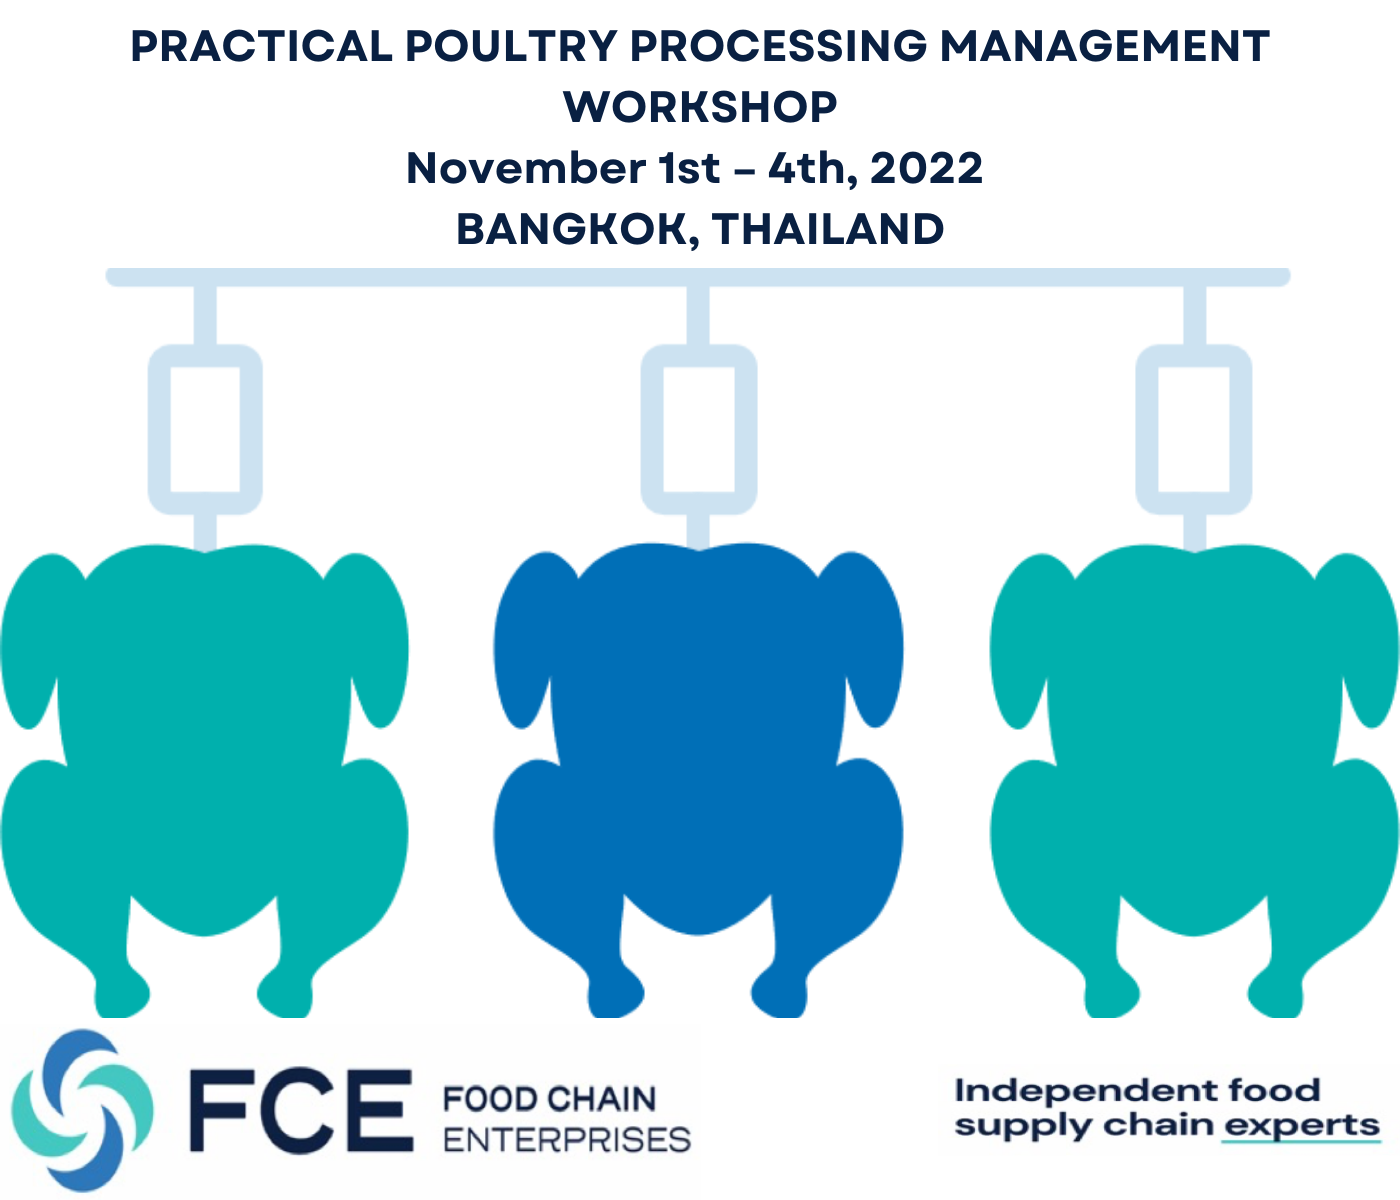 Practical Poultry Processing Management Workshop by FCE